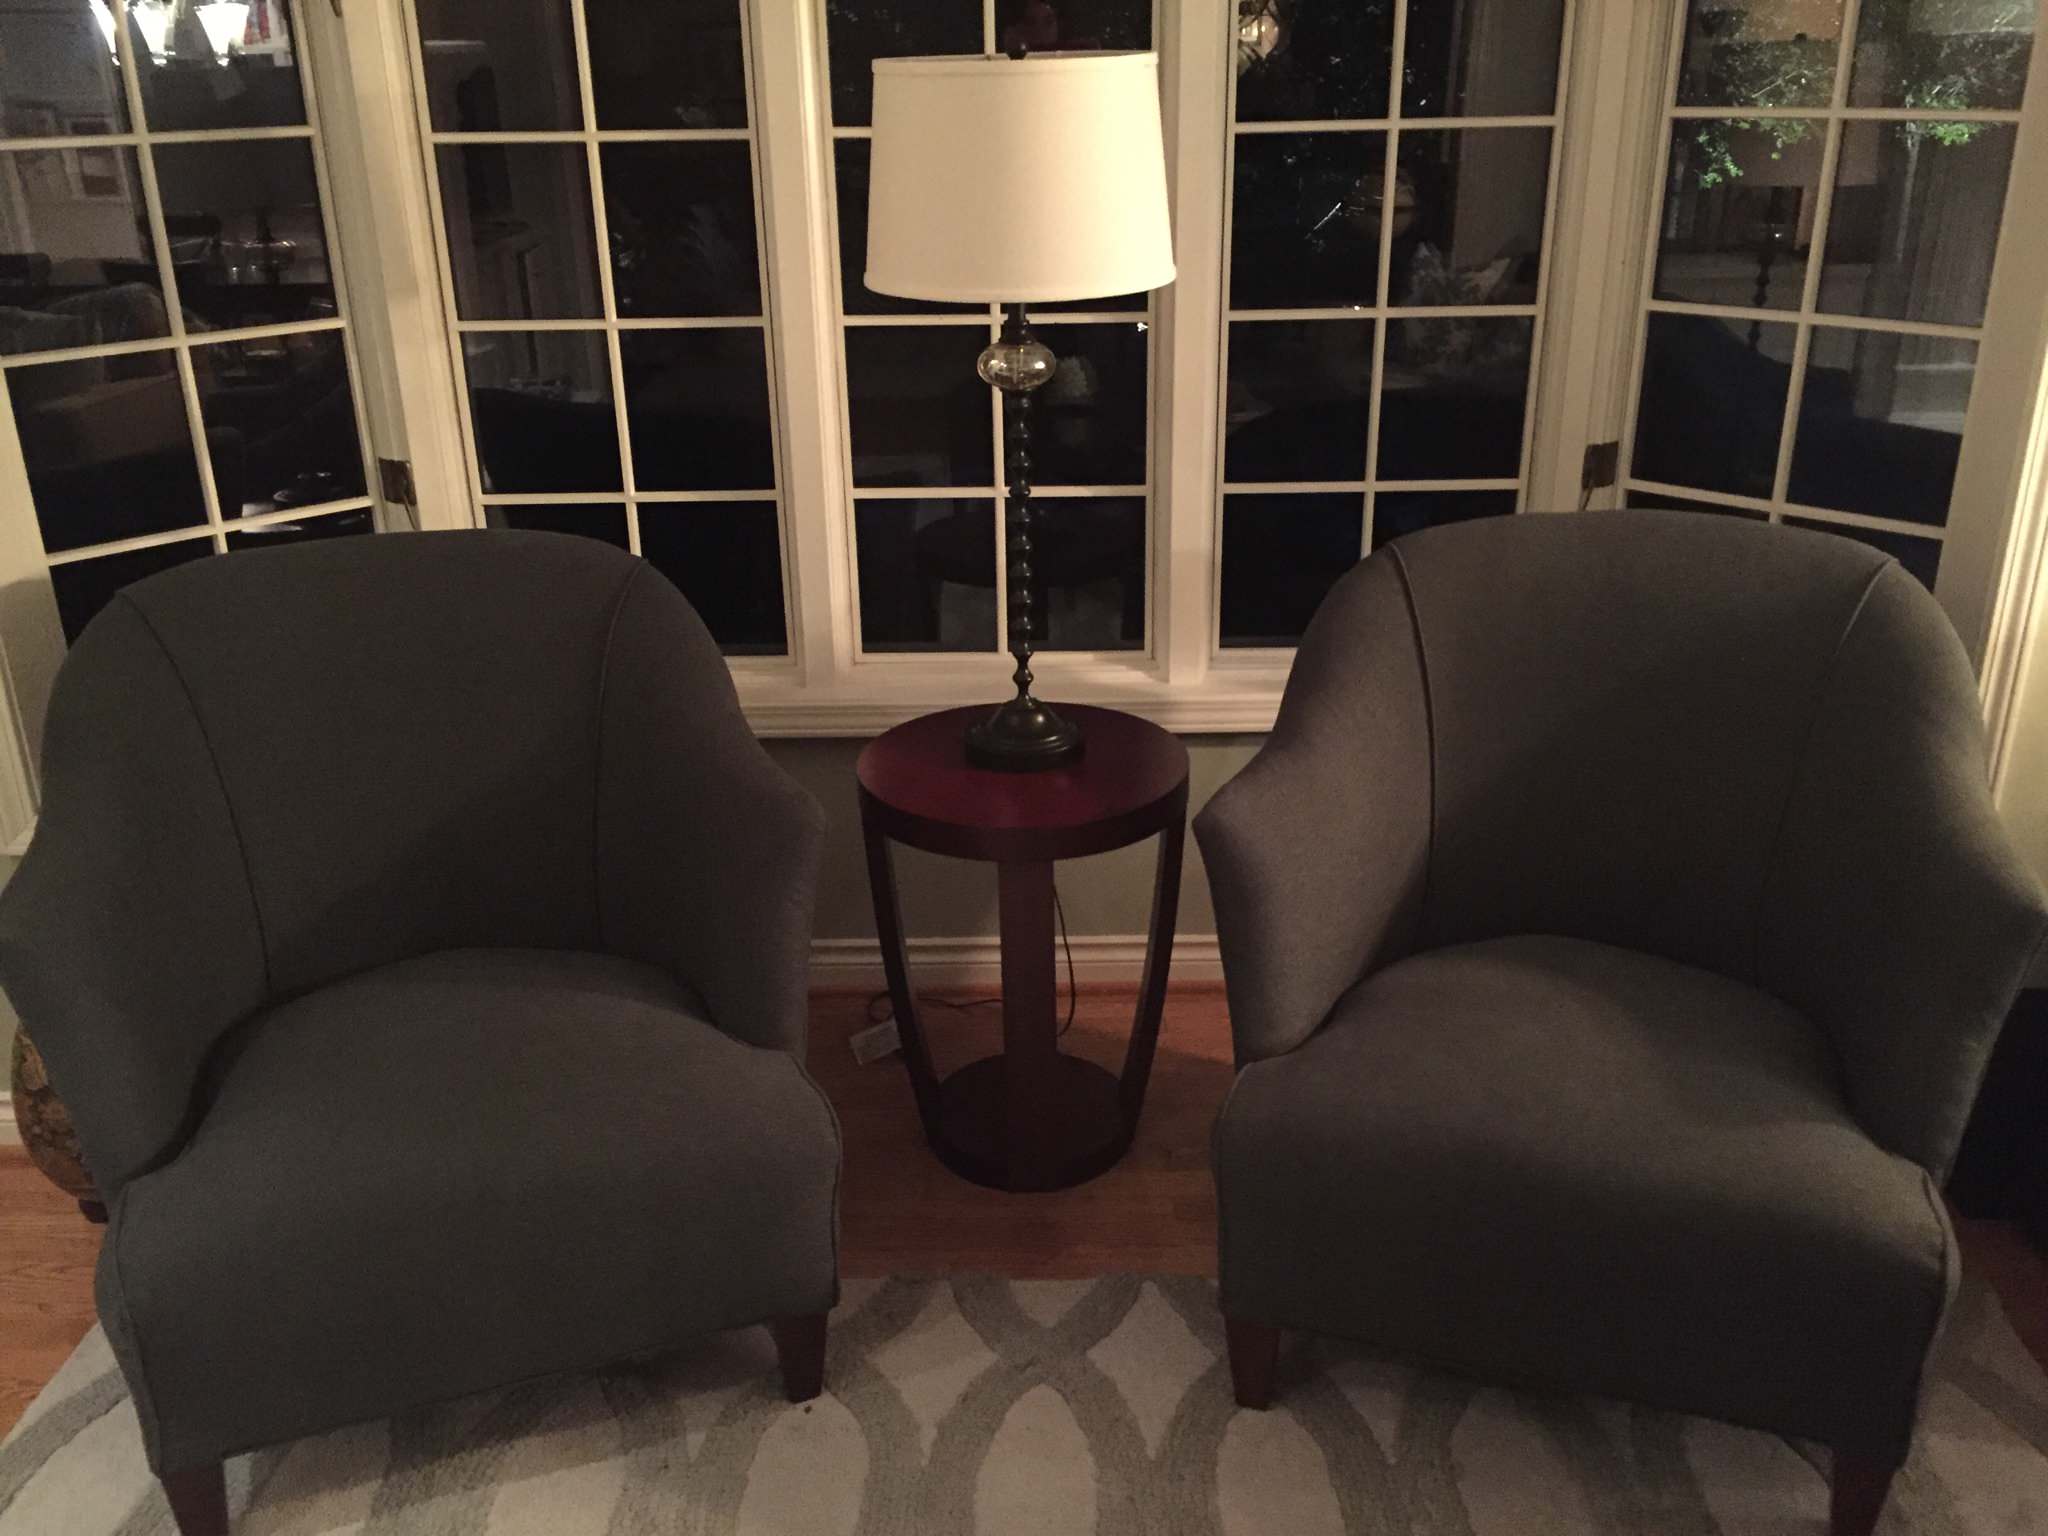 Michelle's chairs